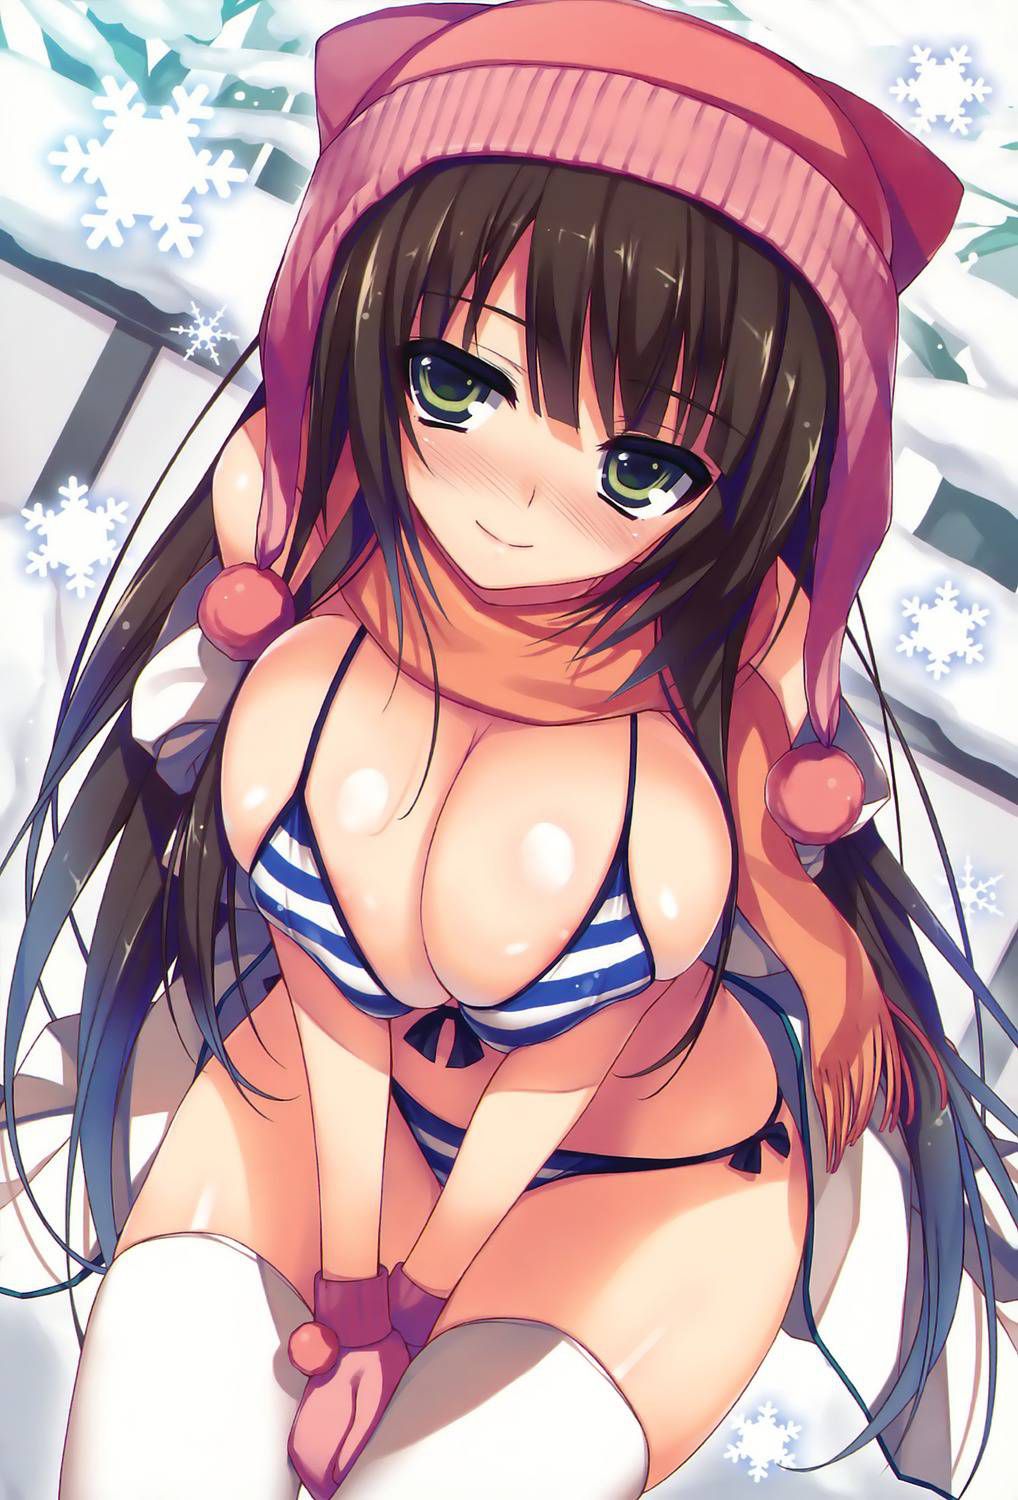 Super Kava! Second erotic image roundup of girls in swimsuit wwww part3 27